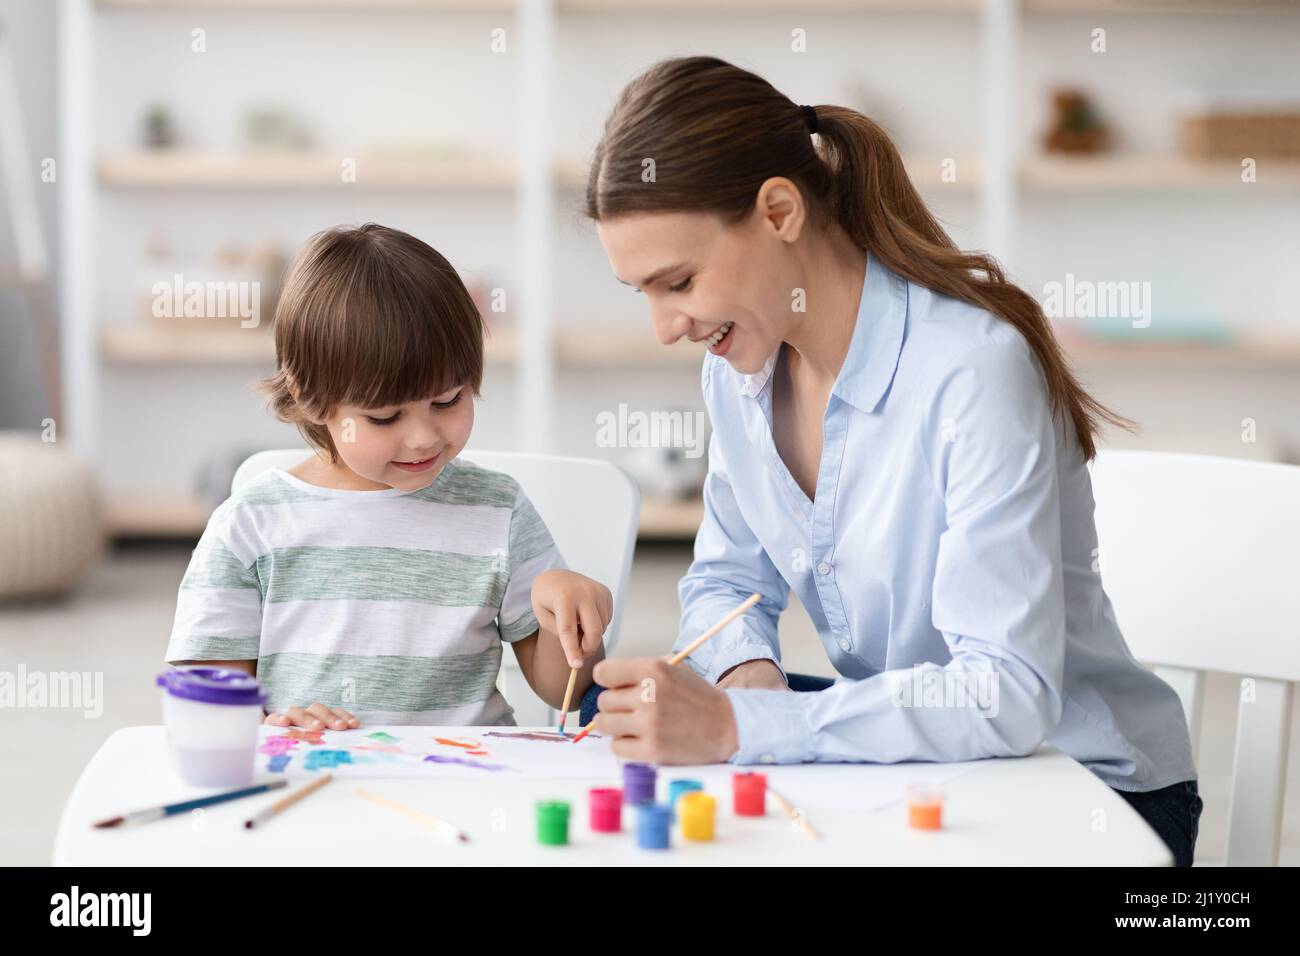 Cute little boy enjoying art classes, drawing picture with colorful paints, sitting at desk with teacher and laughing Stock Photo